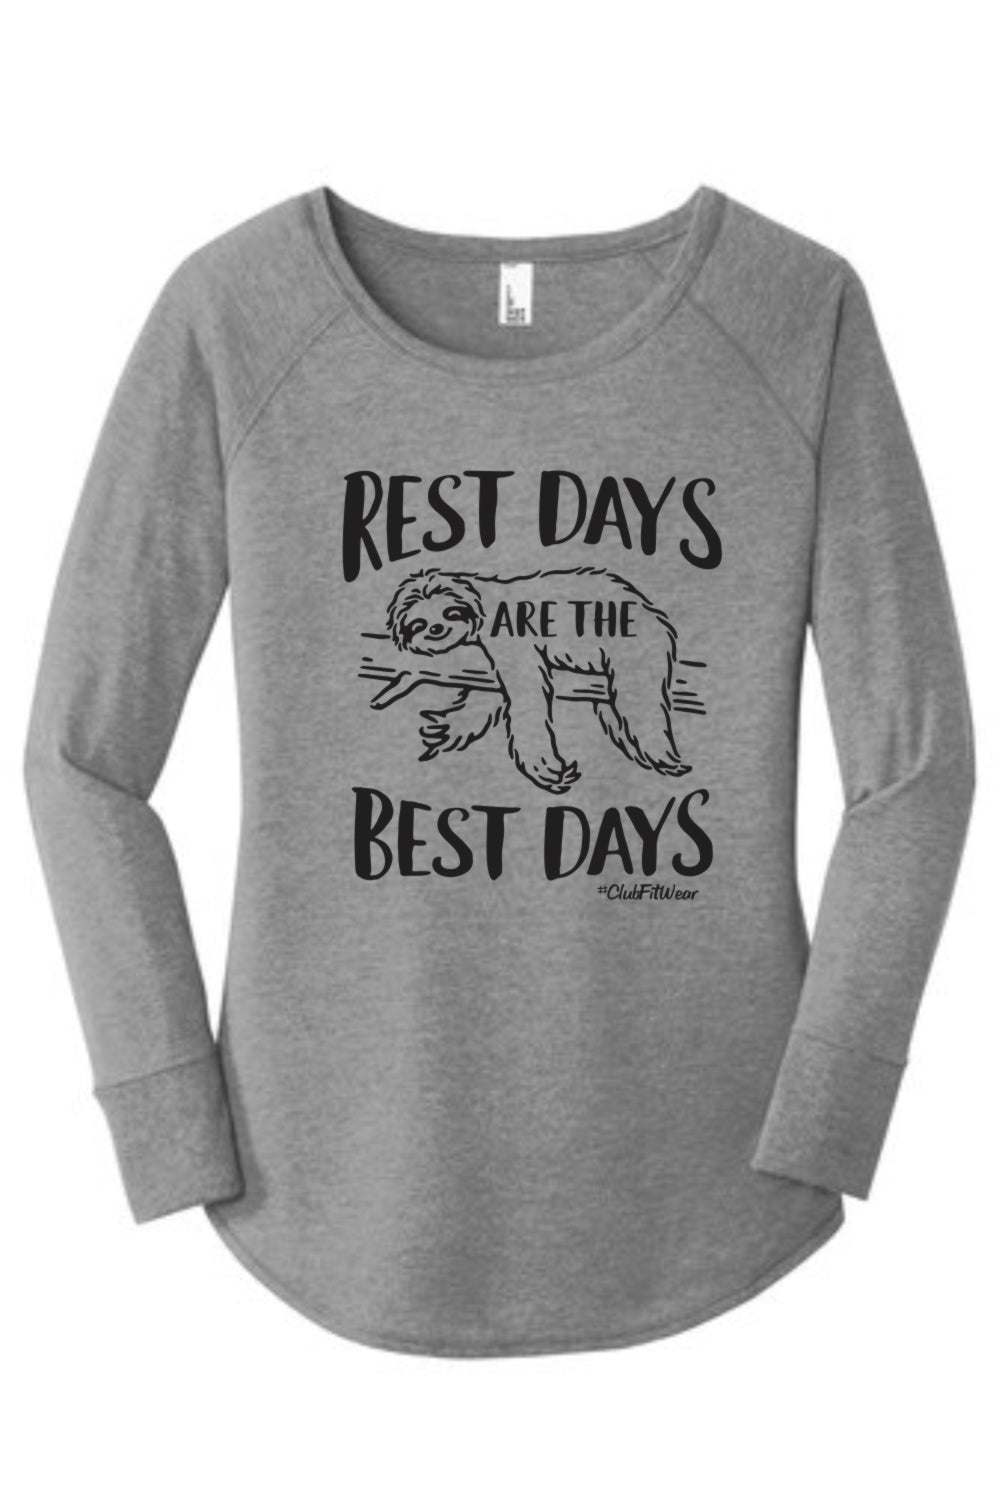 Rest Day are the Best Days - Long Sleeve Tunic